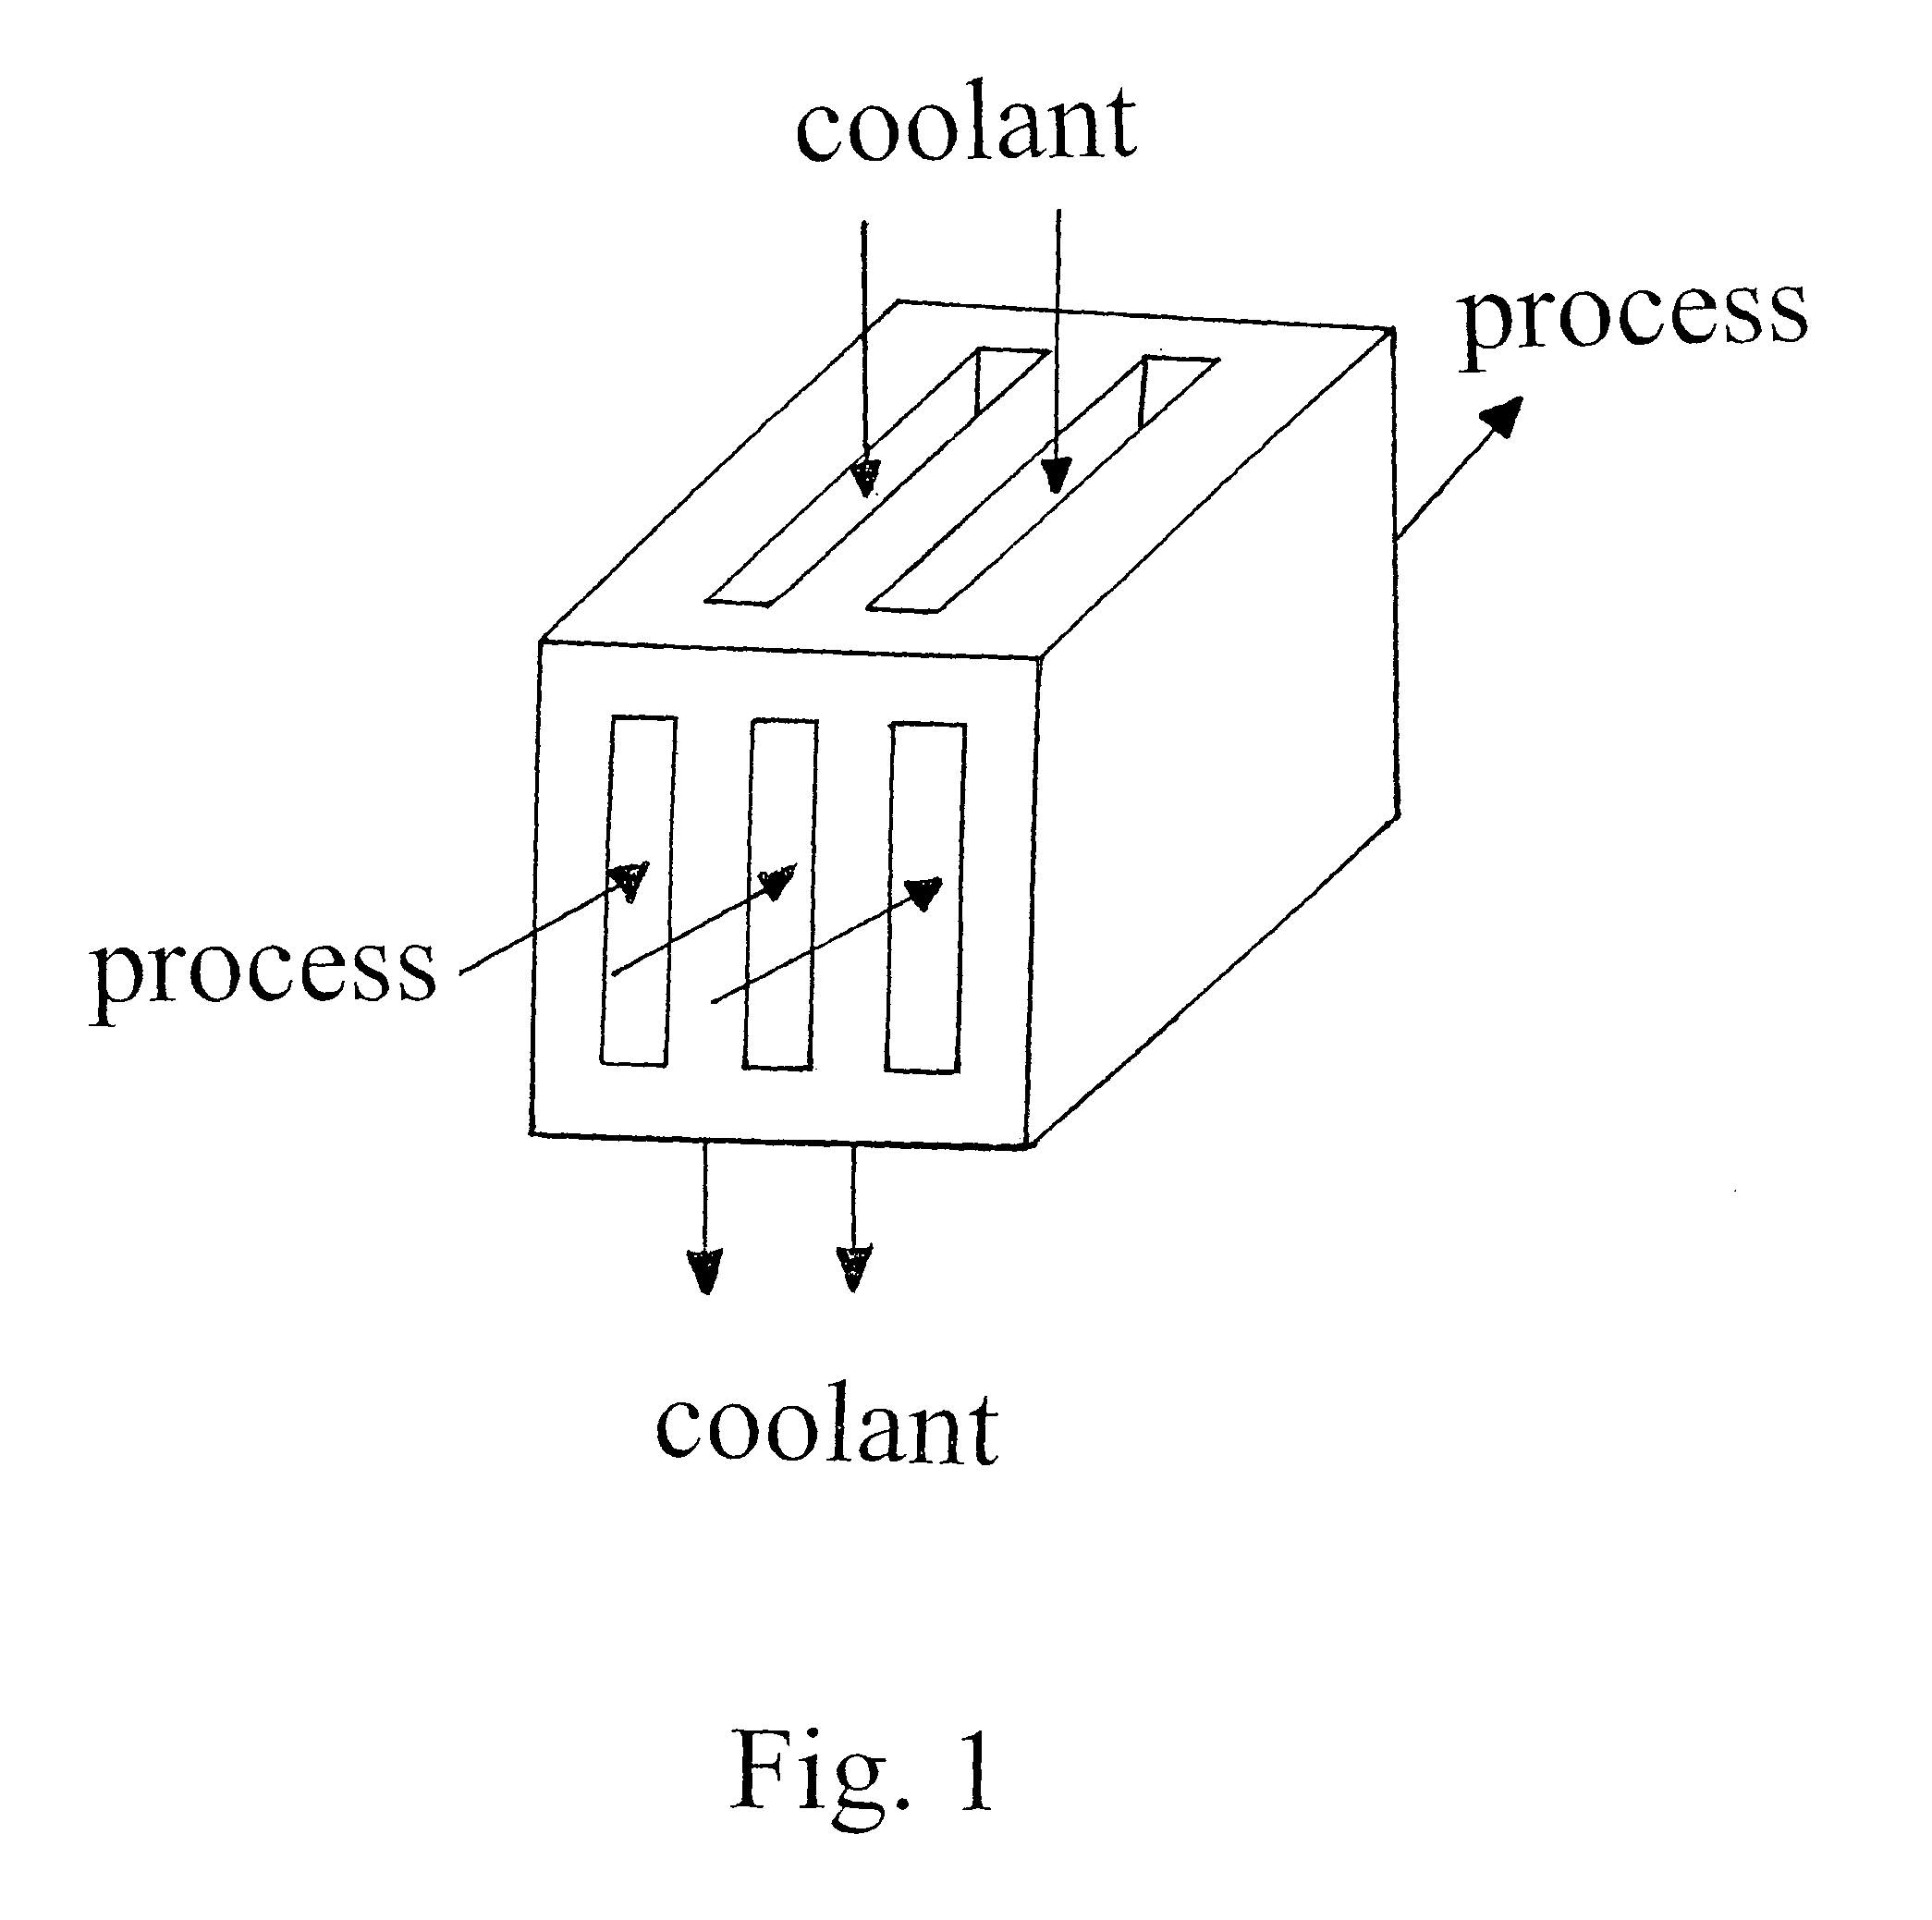 Tethered catalyst processes in microchannel reactors and systems containing a tethered catalyst or tethered chiral auxiliary